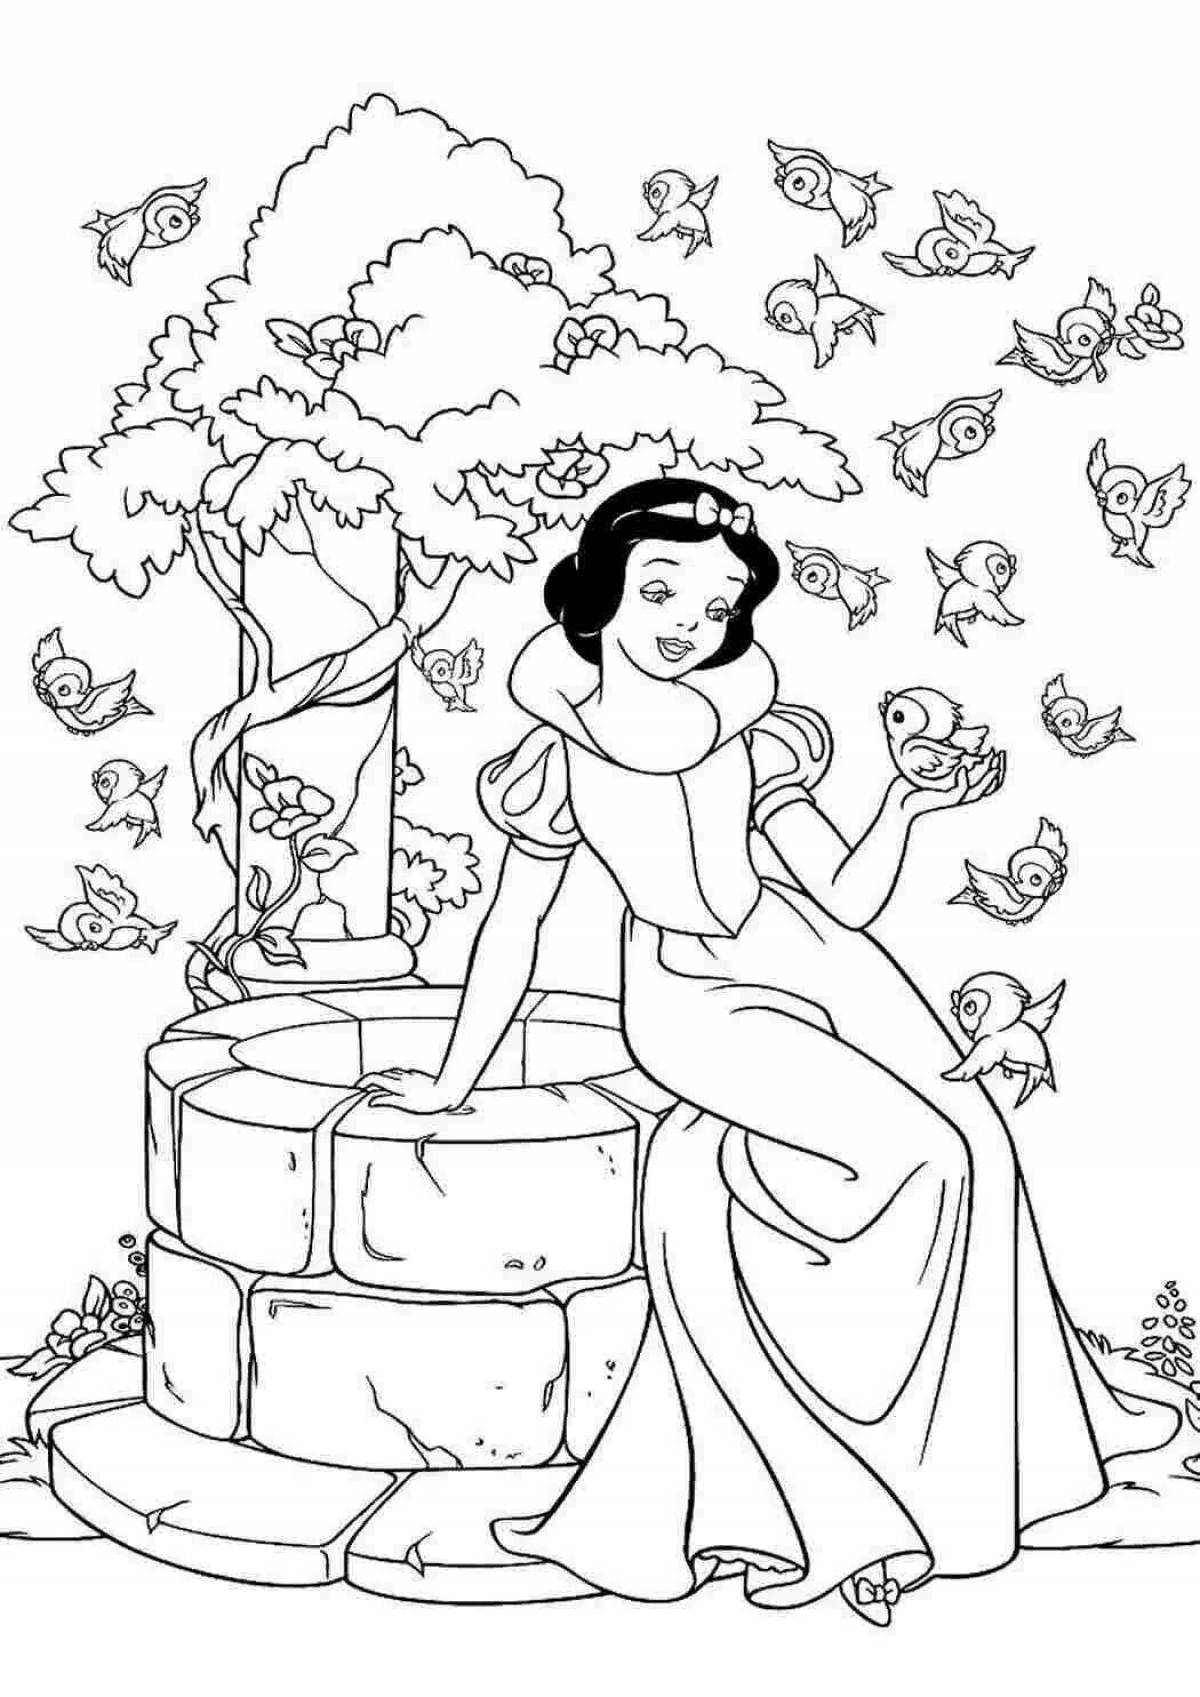 Glorious fairy tale coloring book for girls